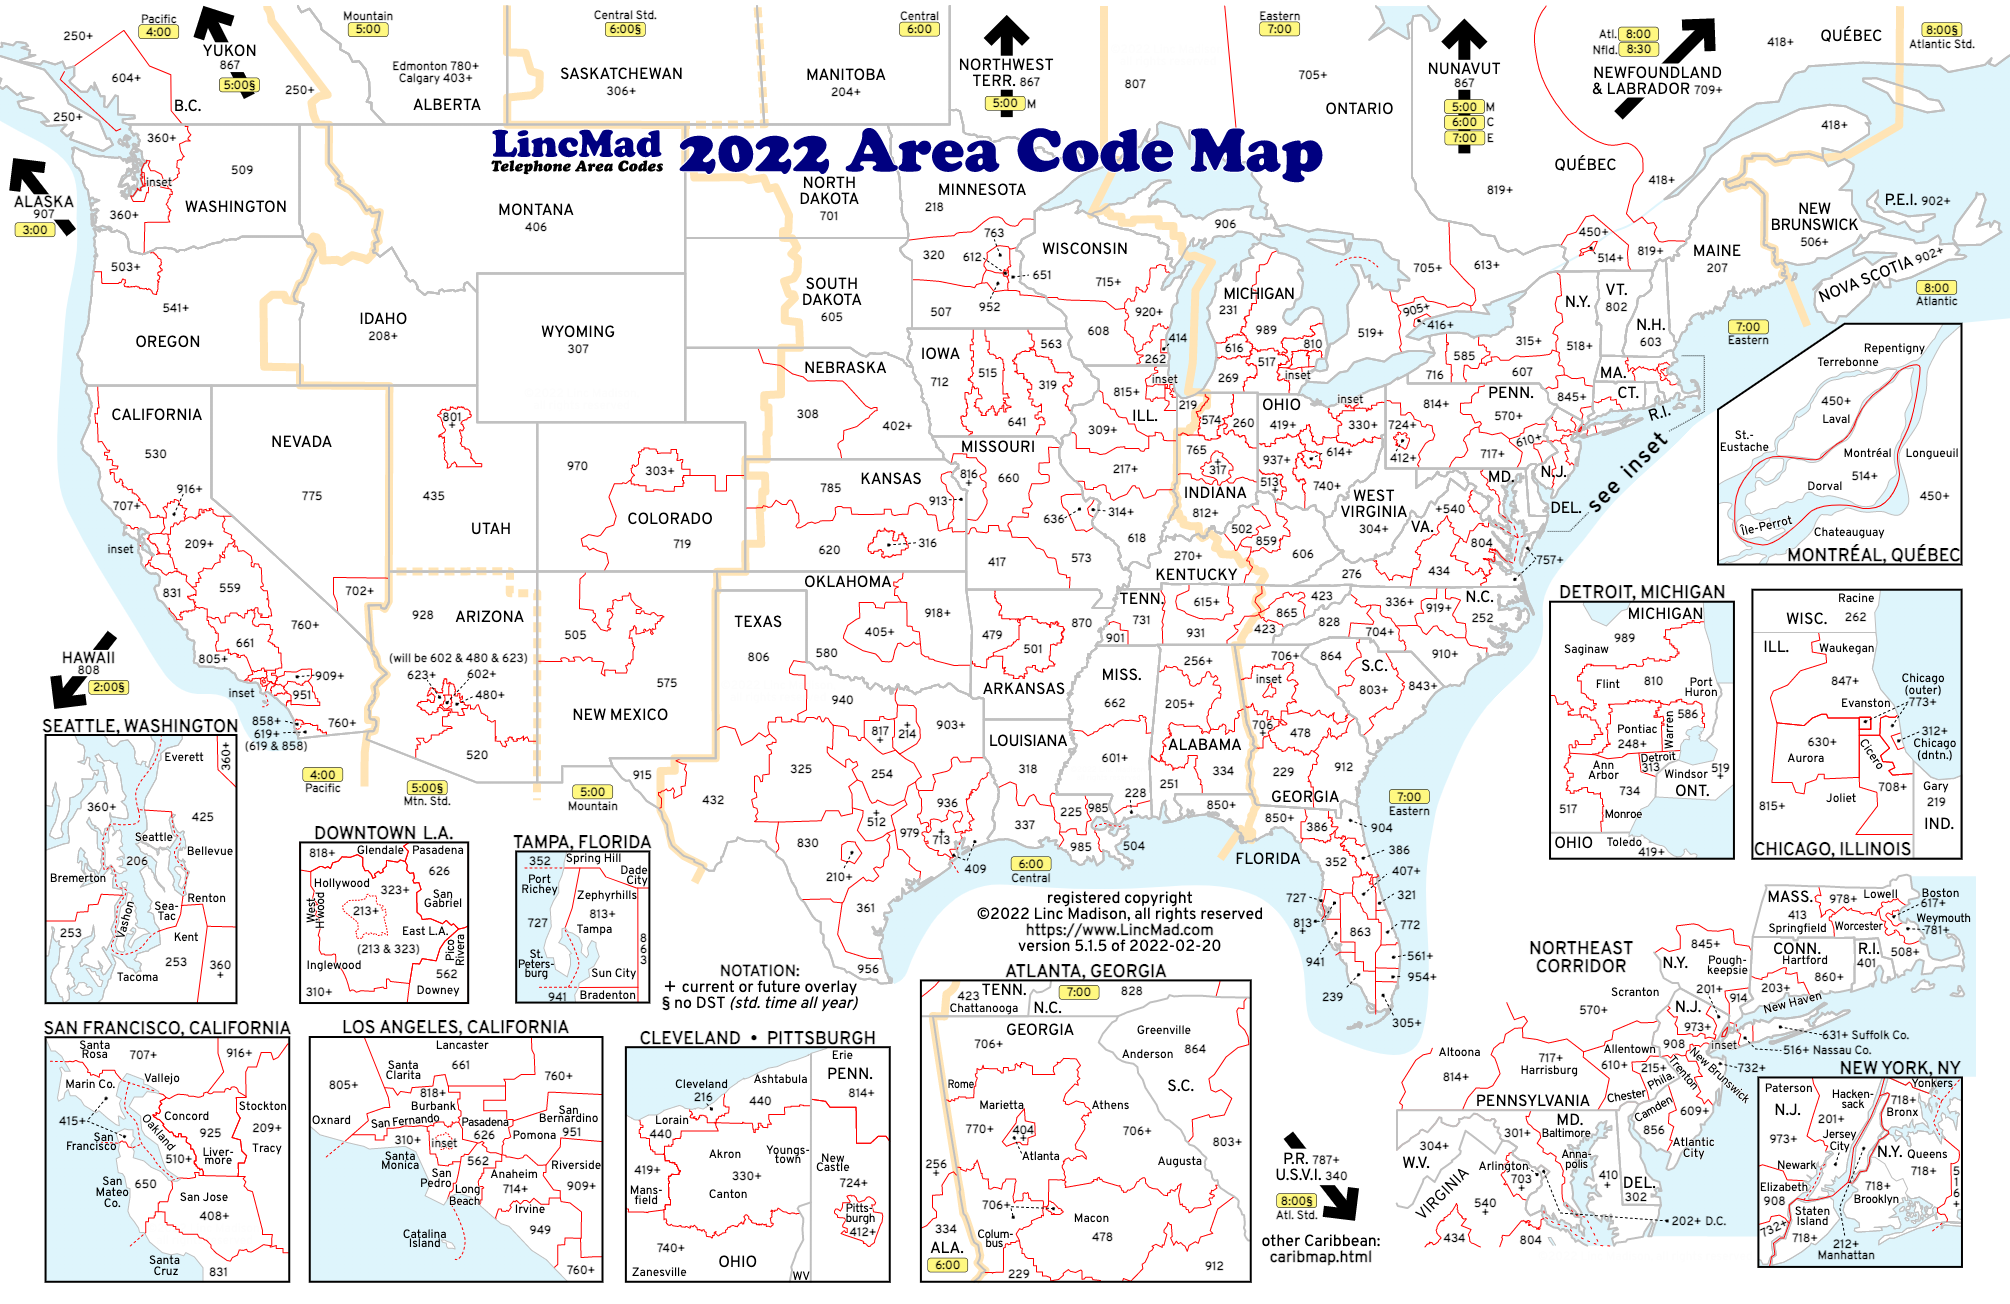 LincMad’s 2022 area code map with time zones, registered copyright ©2005 - 2022